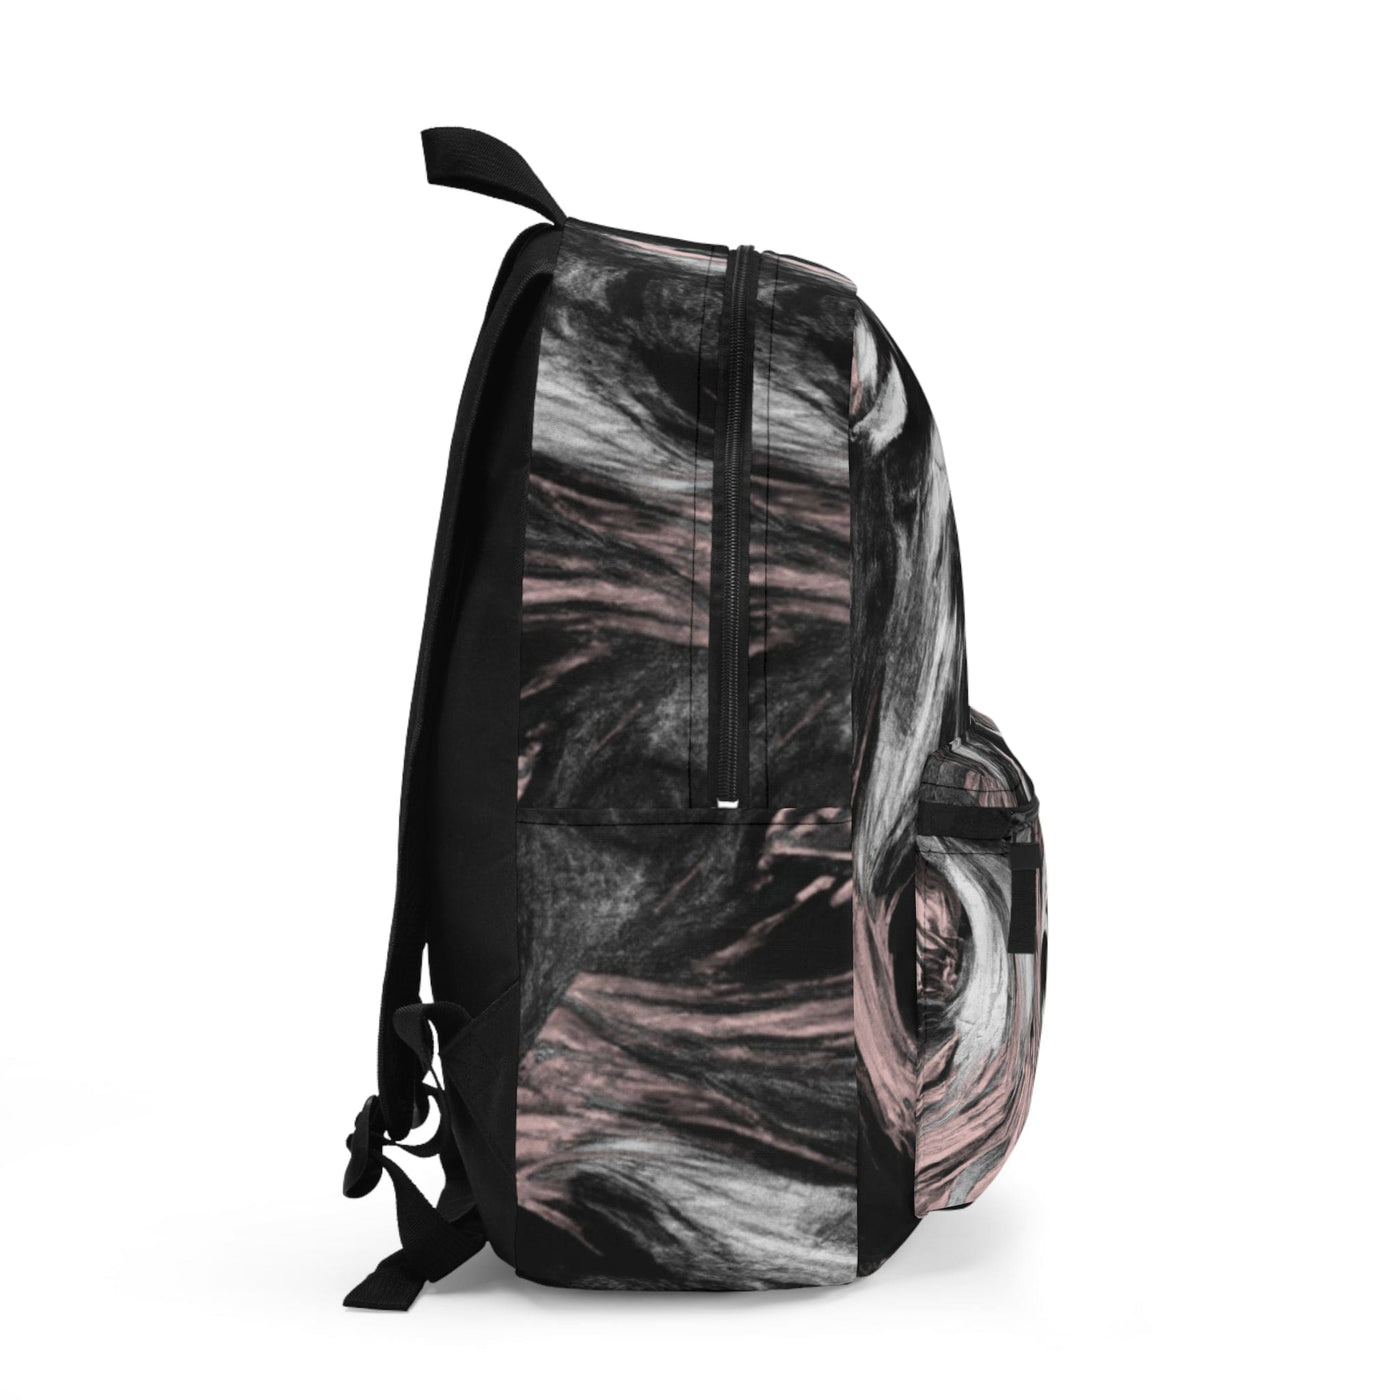 Backpack - Large Water - resistant Bag Black Pink White Abstract Pattern - Bags